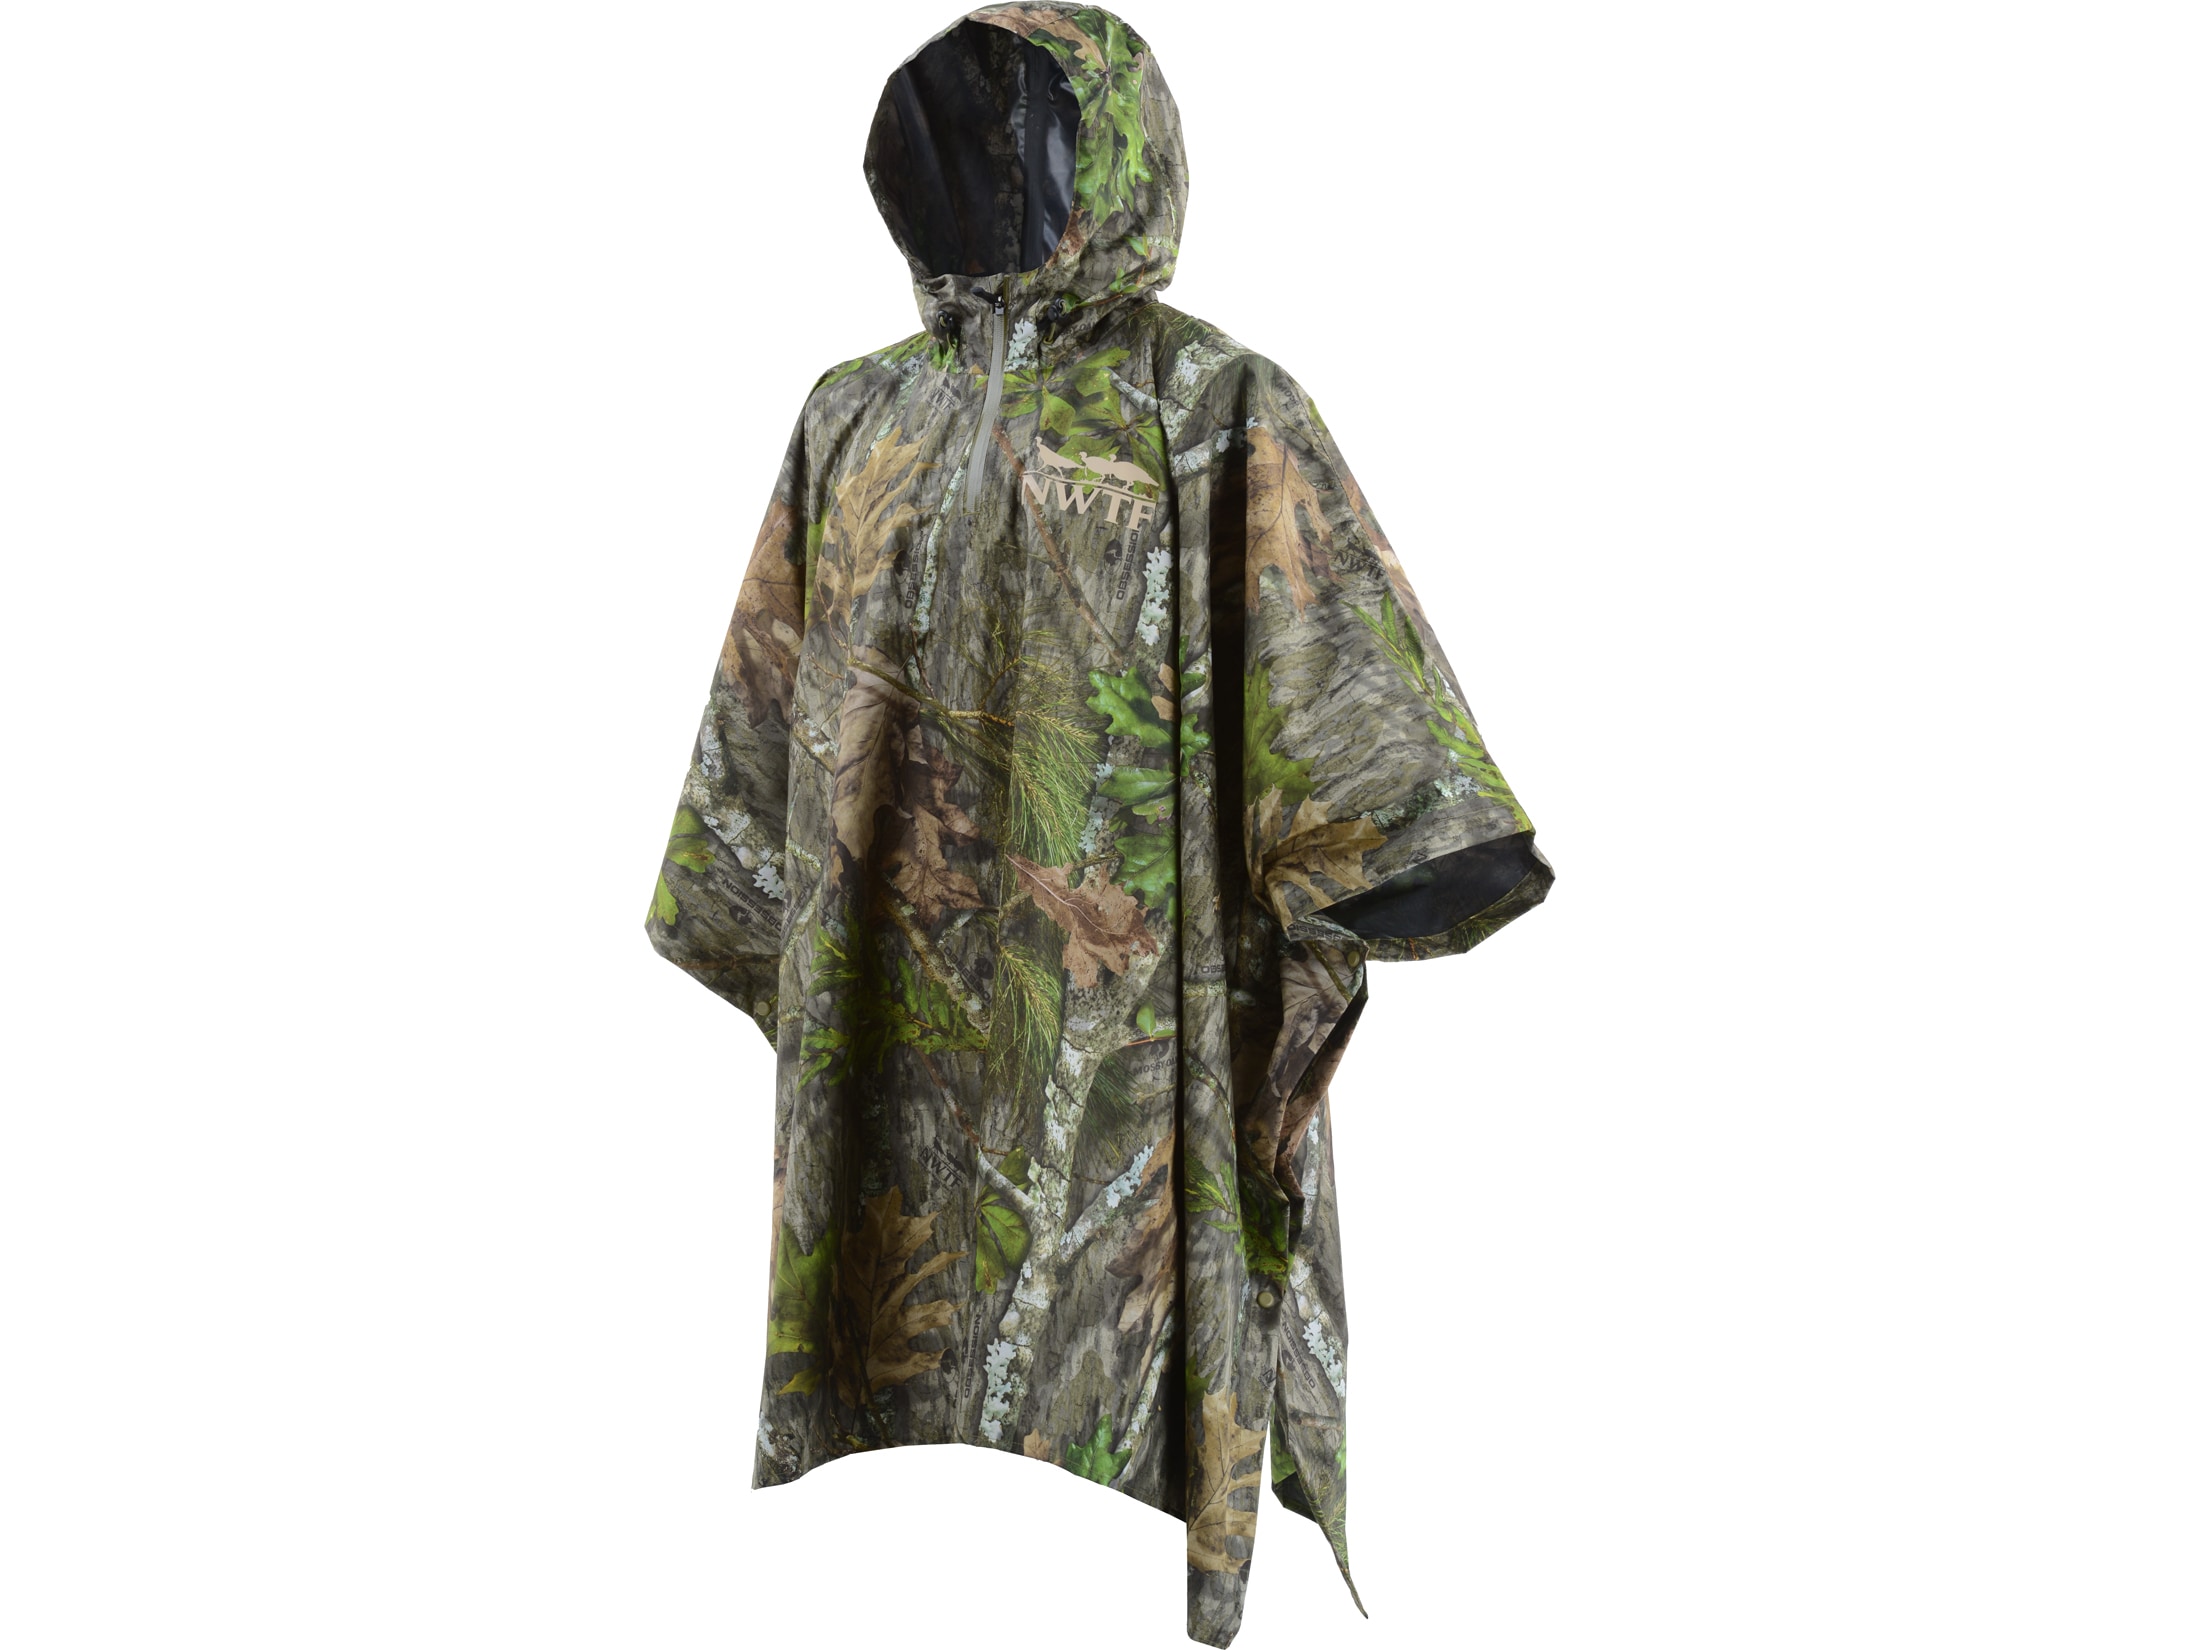 Nomad NWTF Poncho Polyester Mossy Oak Obsession